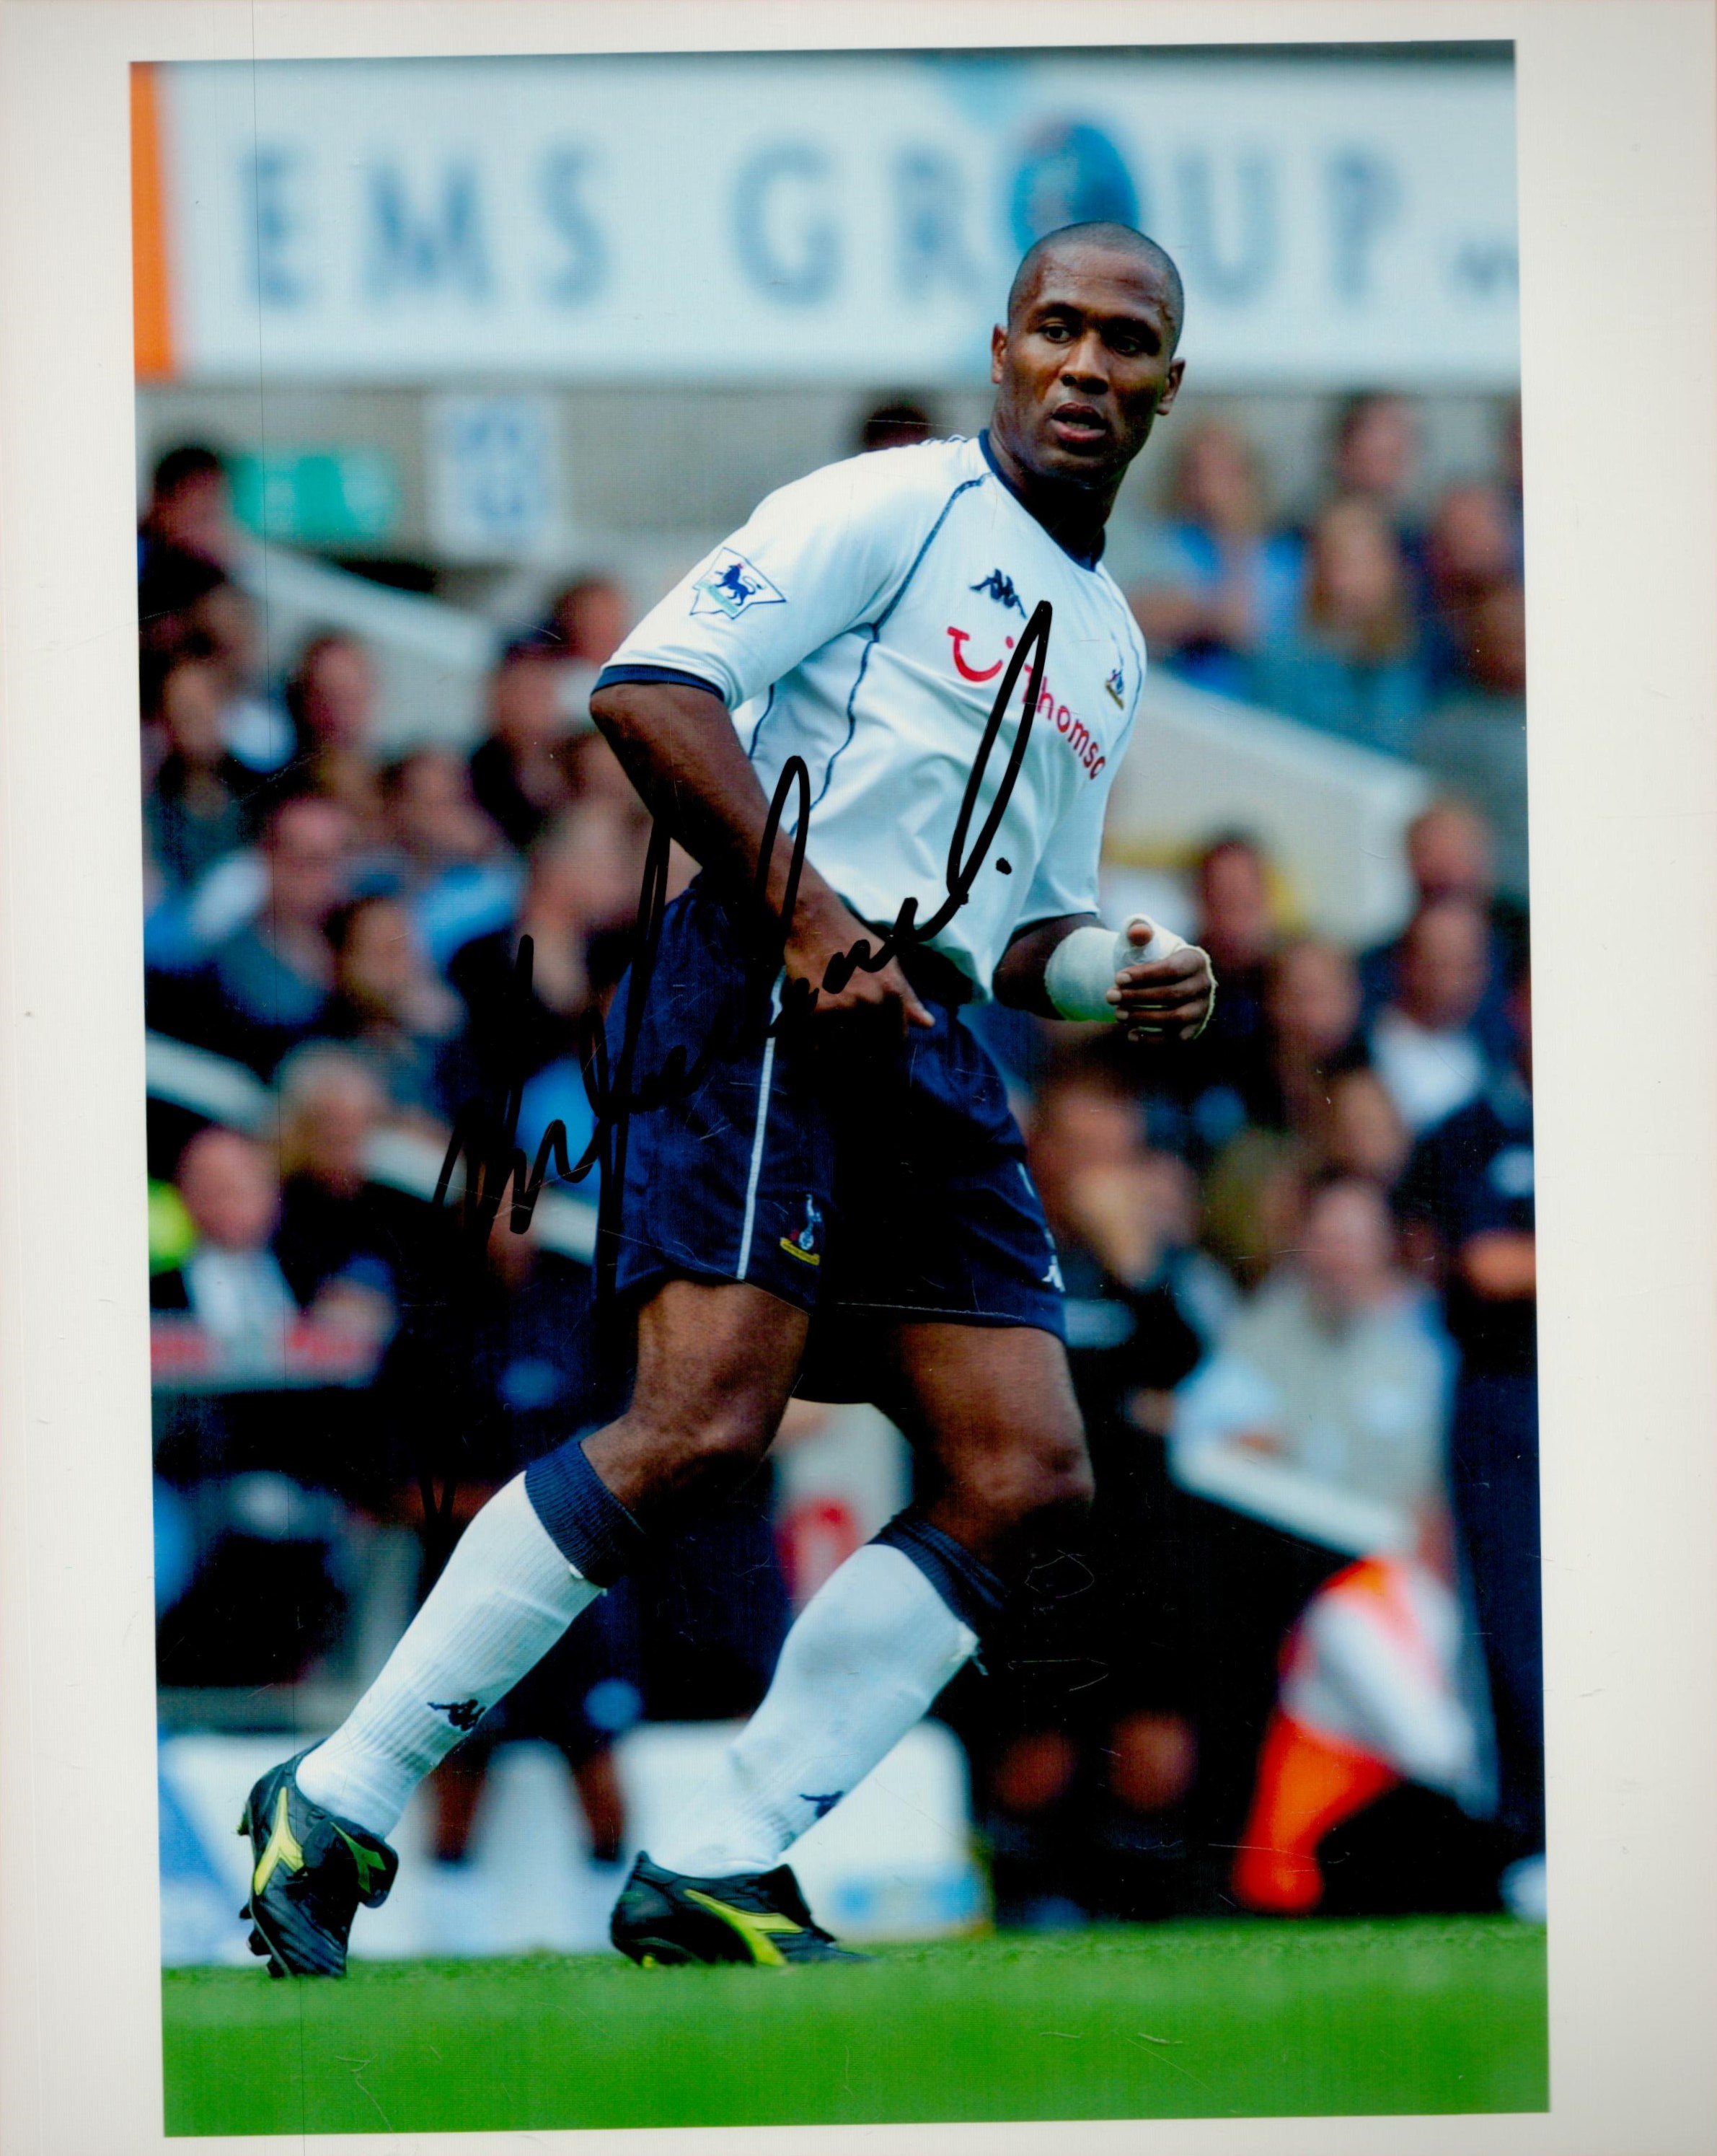 Former Spurs Star Les Ferdinand Signed 10x8 inch Colour Spurs FC Photo. Good condition. All